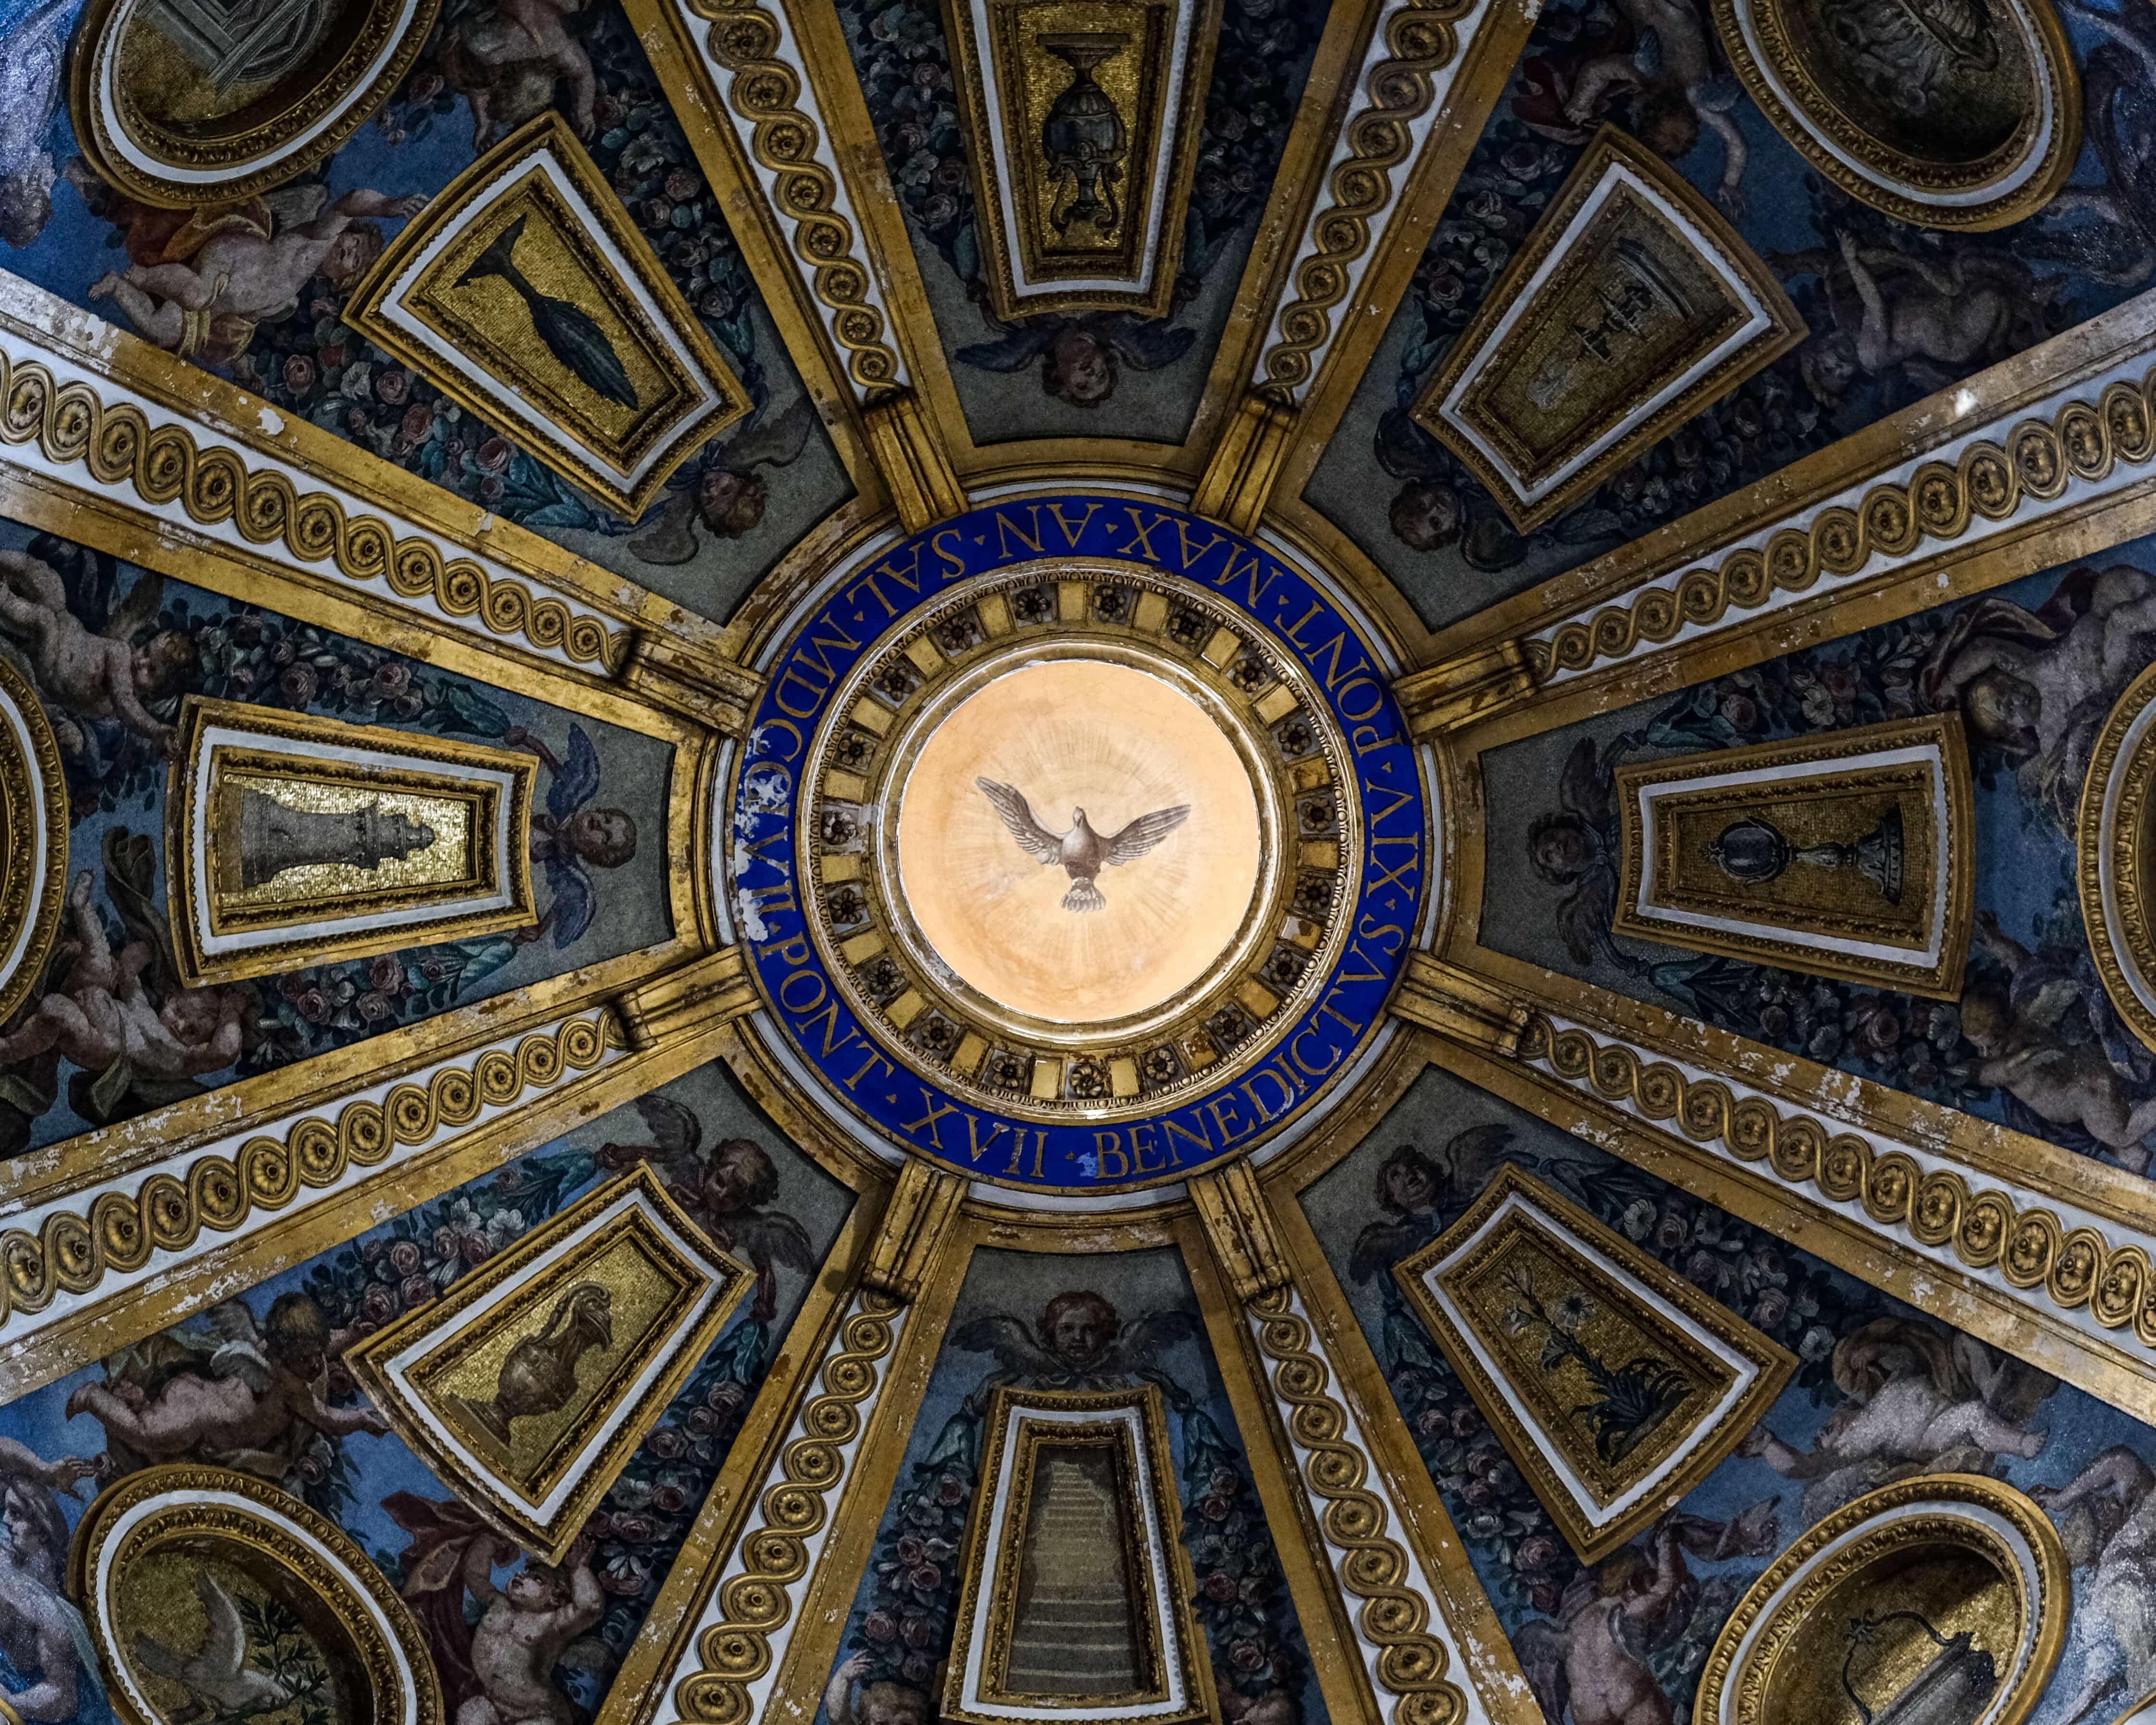 St Peter's Basilica Ceiling at the Vatican.